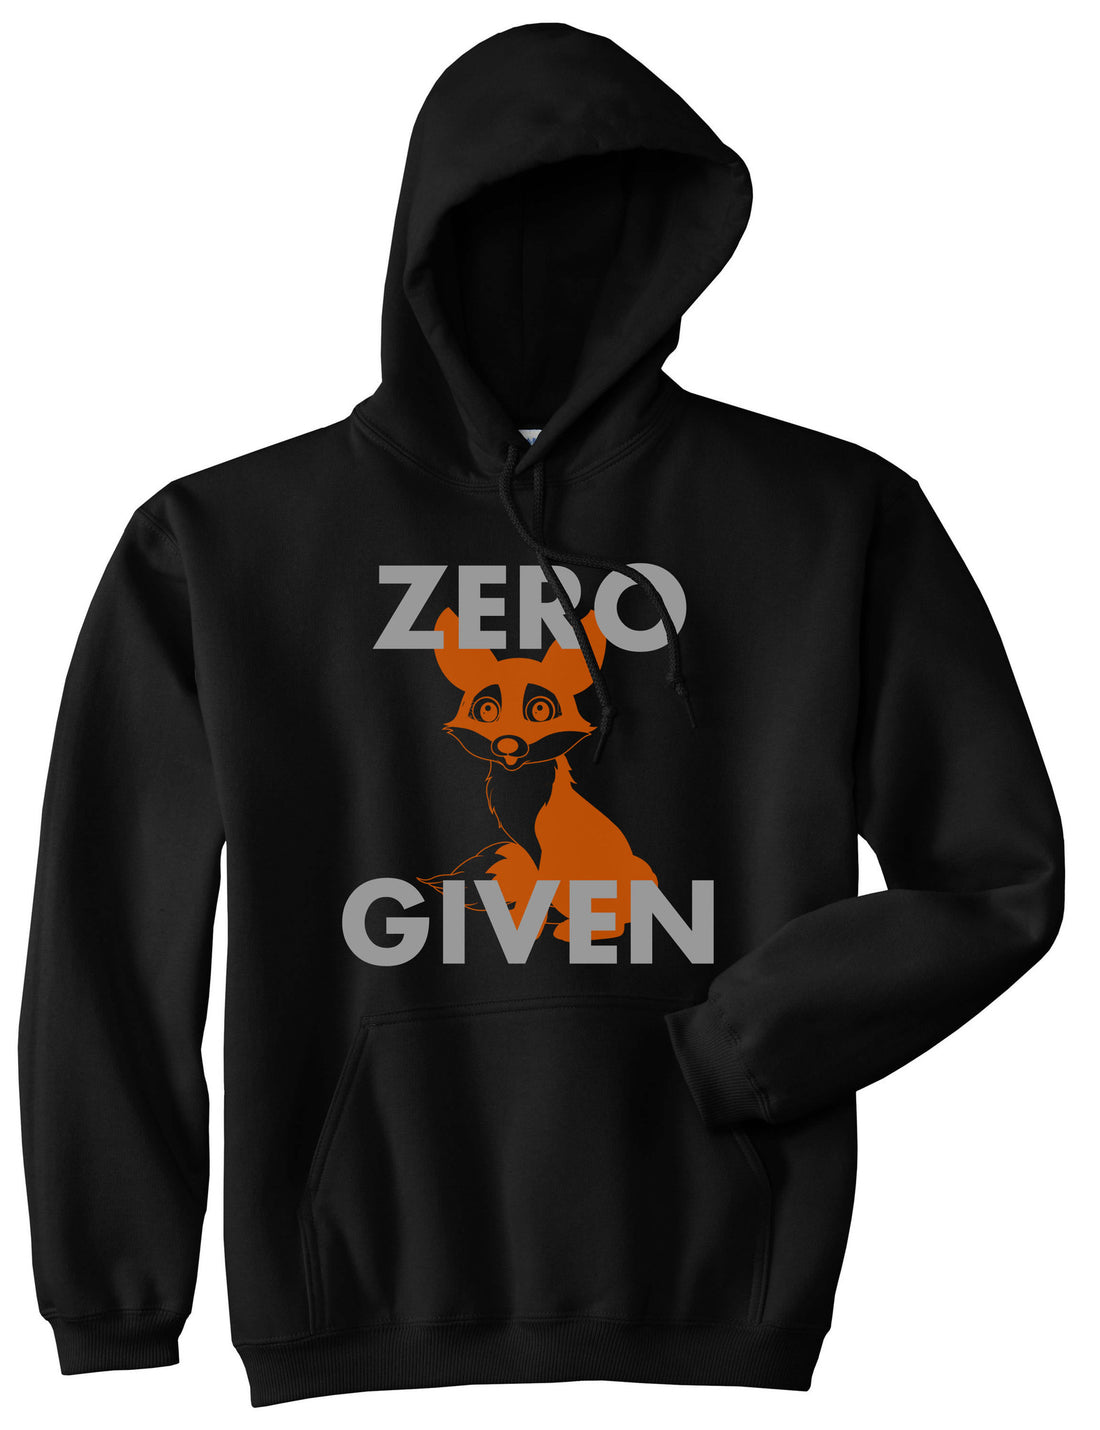 Zero Fox Given Funny Pullover Hoodie